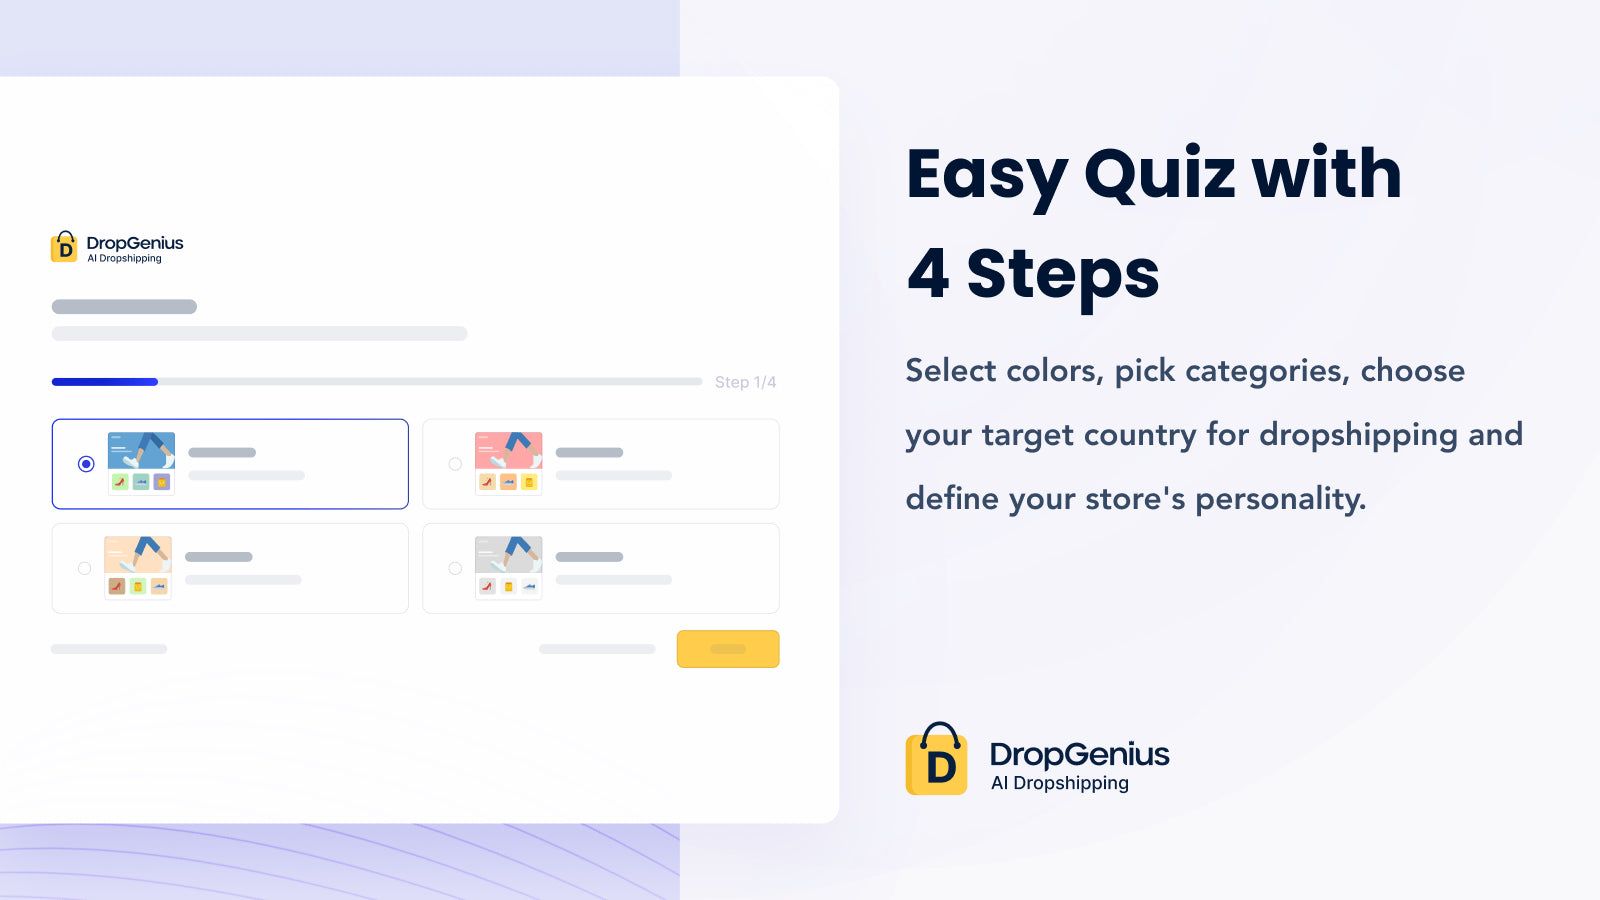 Easy Quiz with 4 Steps